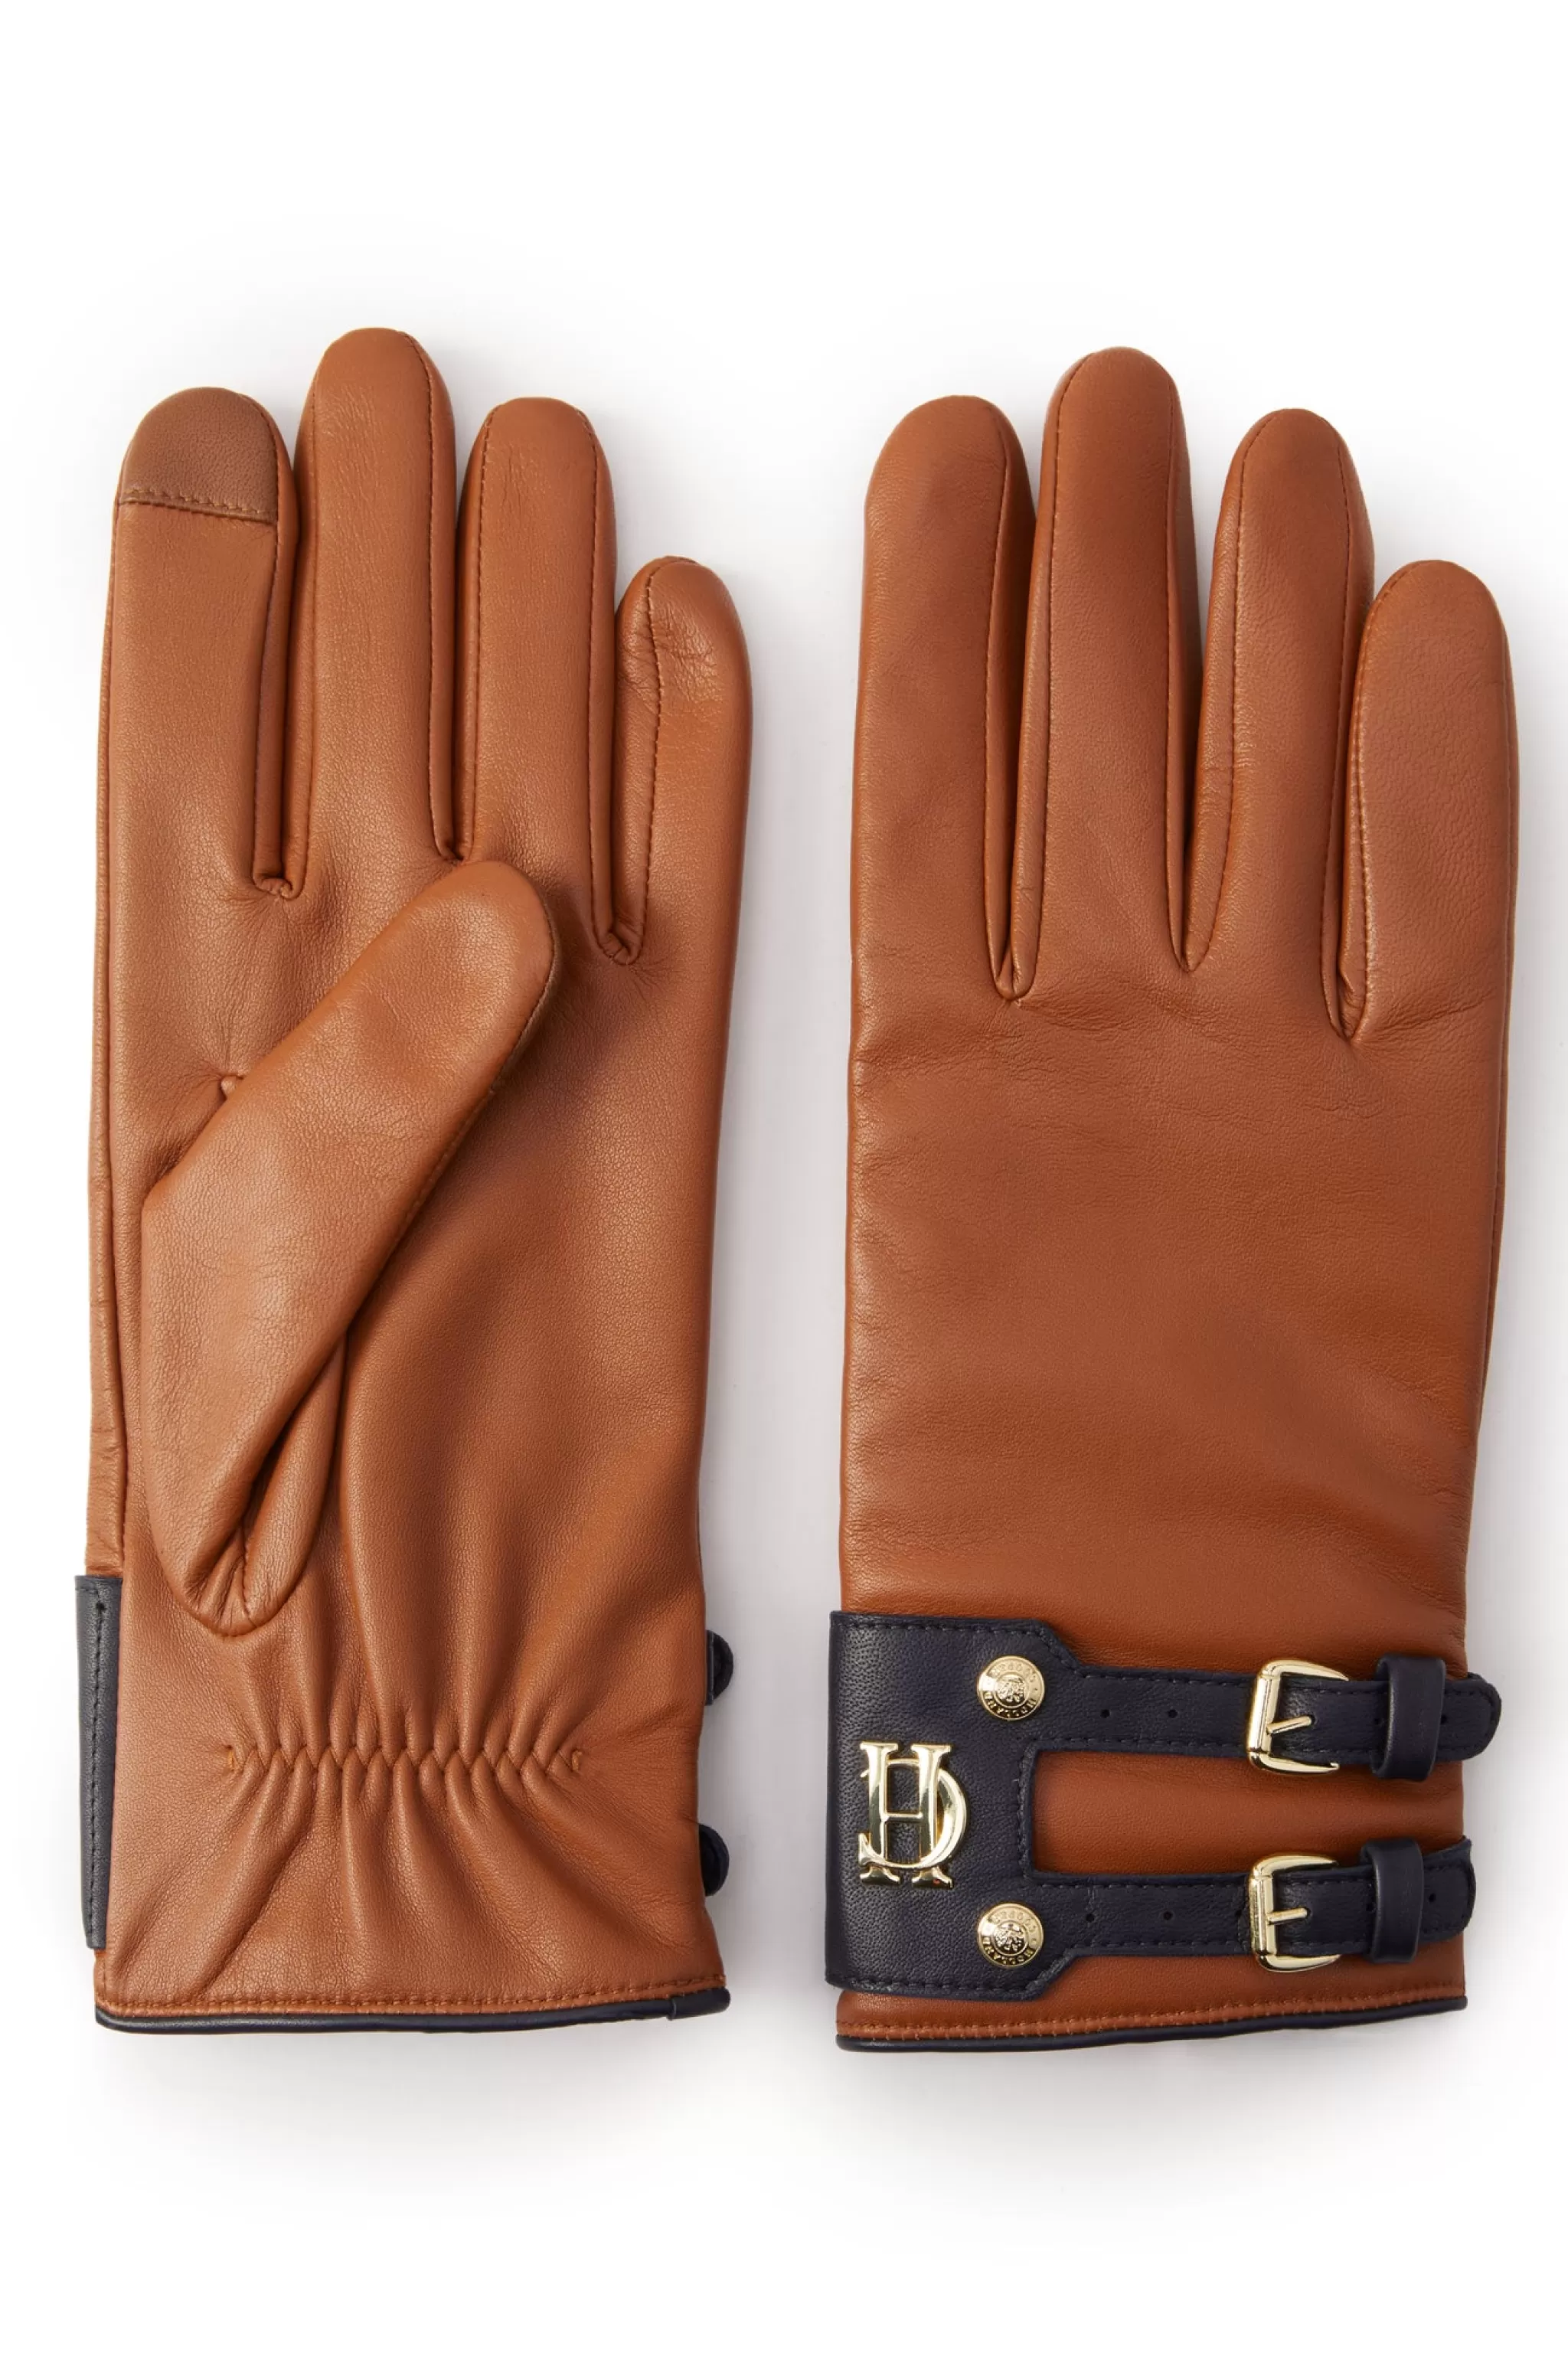 Contrast Leather Gloves>Holland Cooper New